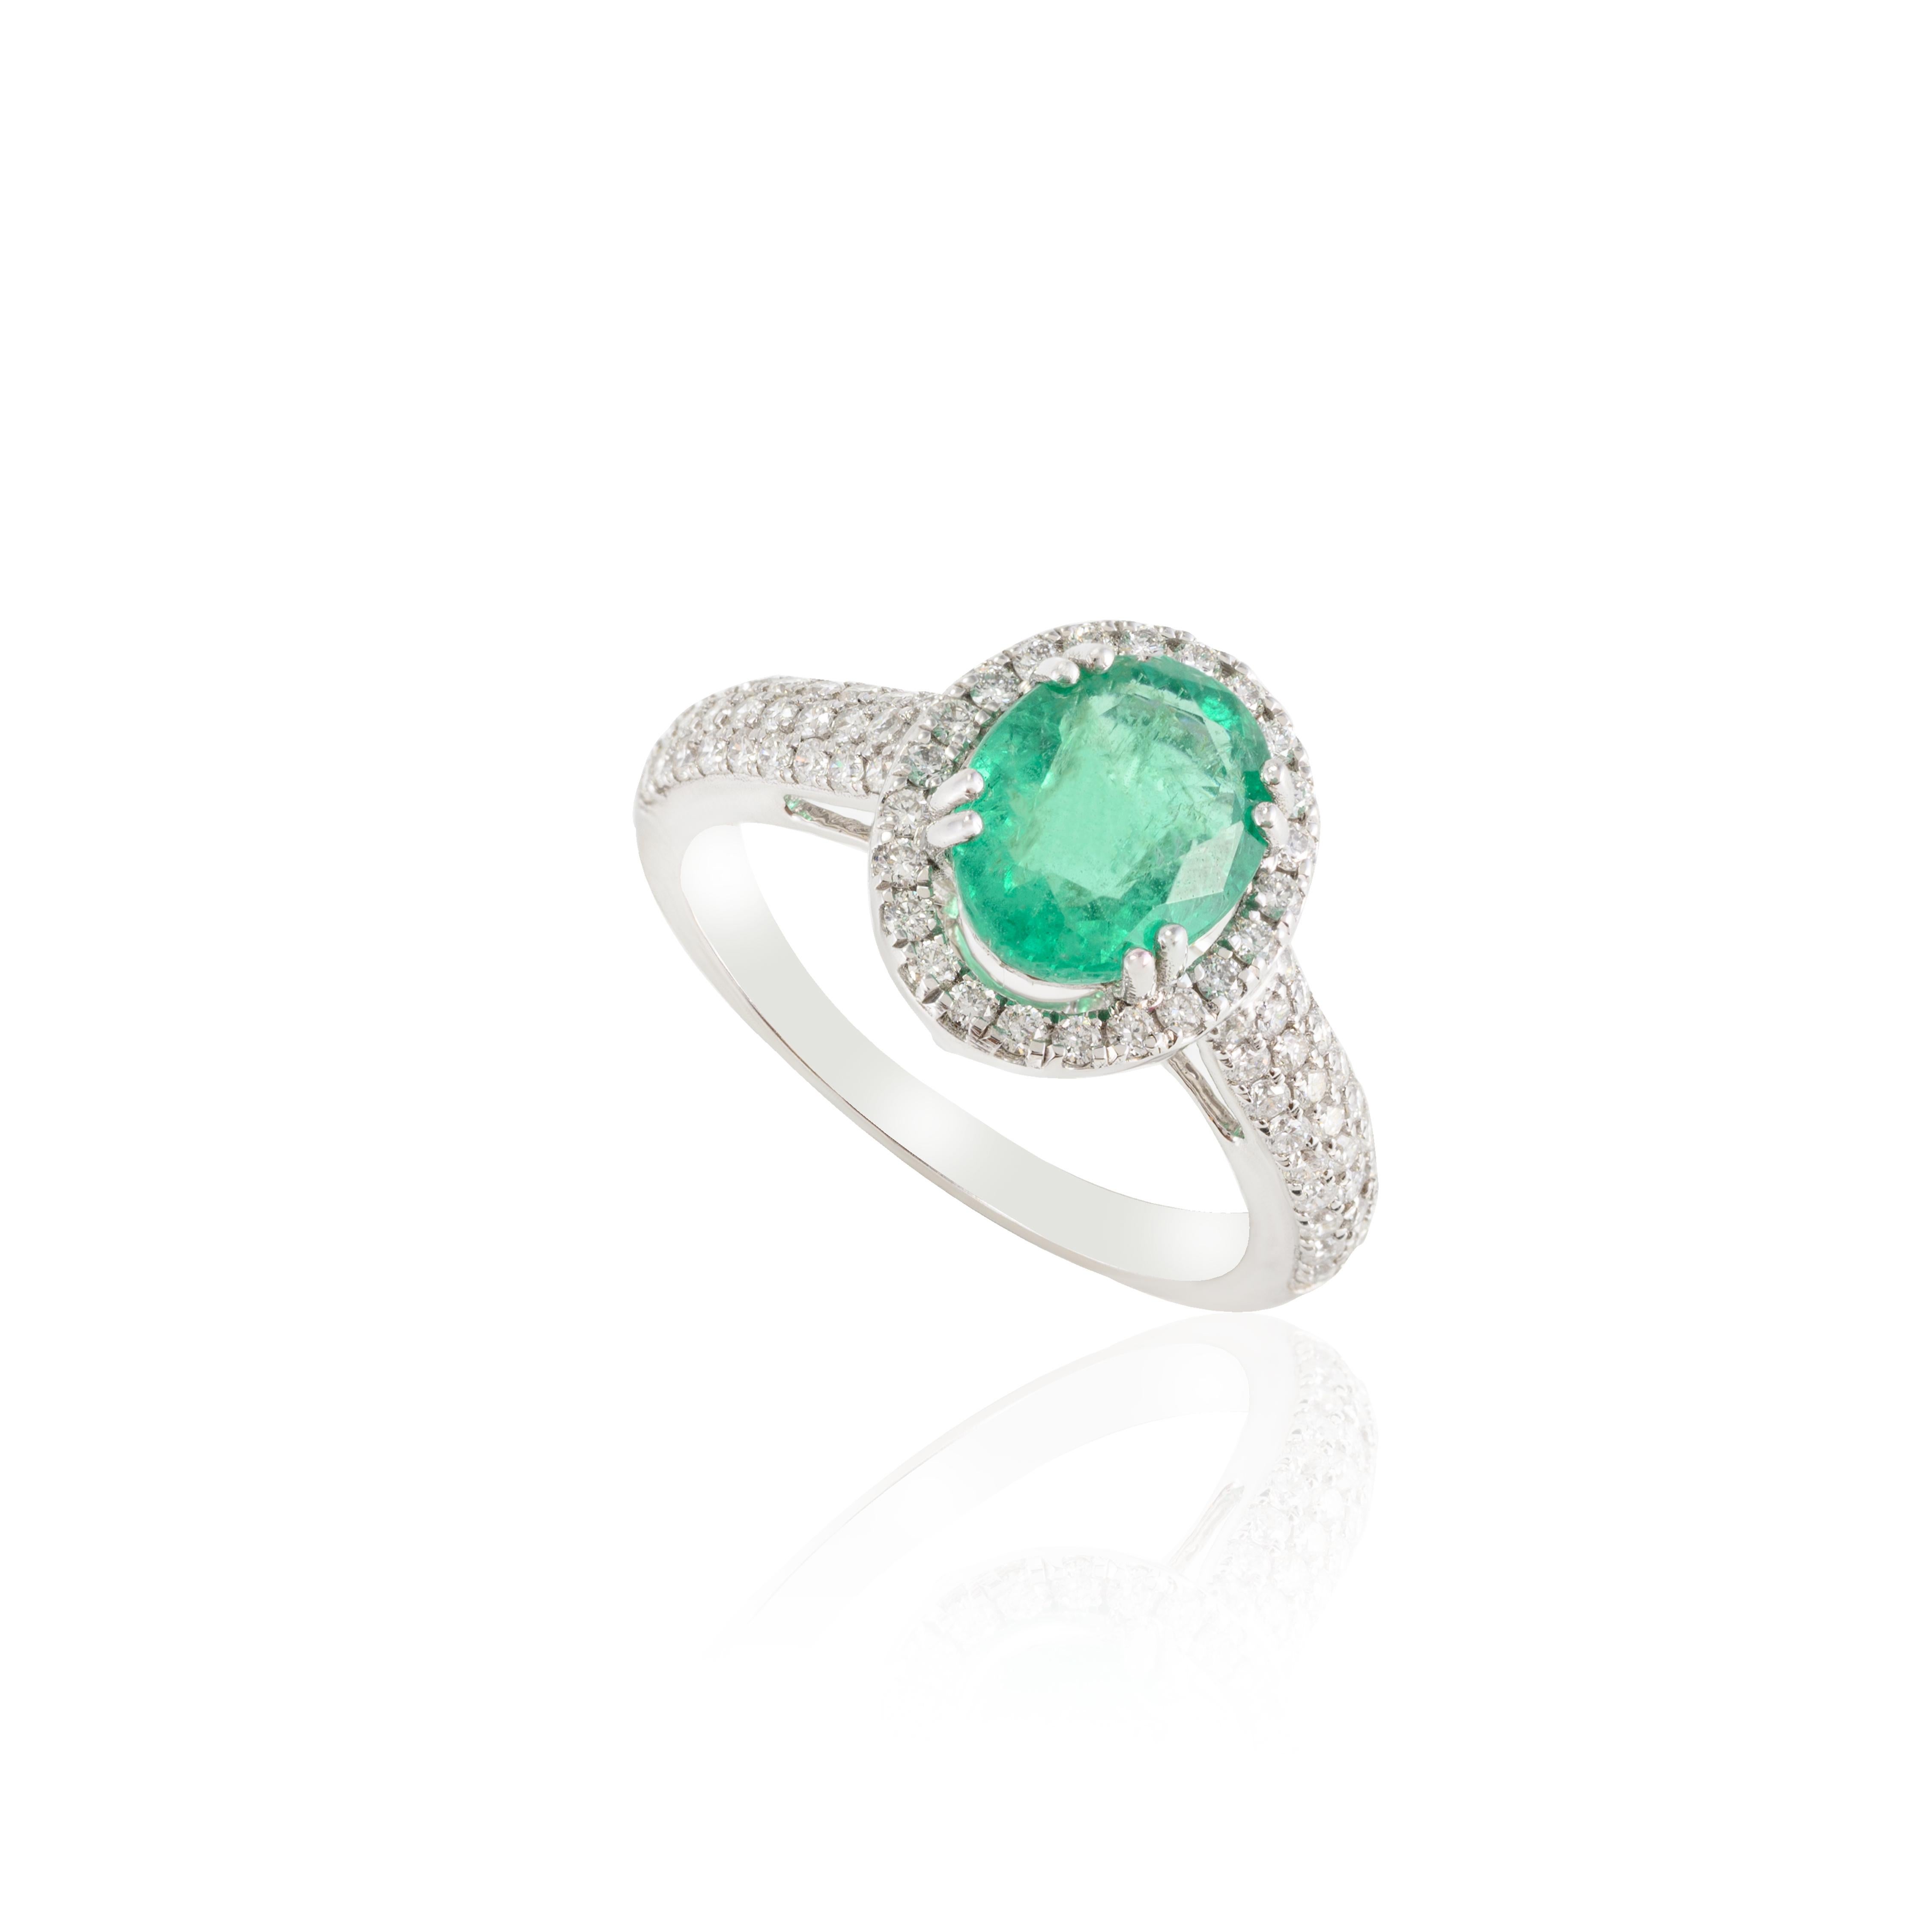 For Sale:  18k Solid White Gold Glamorous Emerald and Diamond Engagement Ring for Her 4